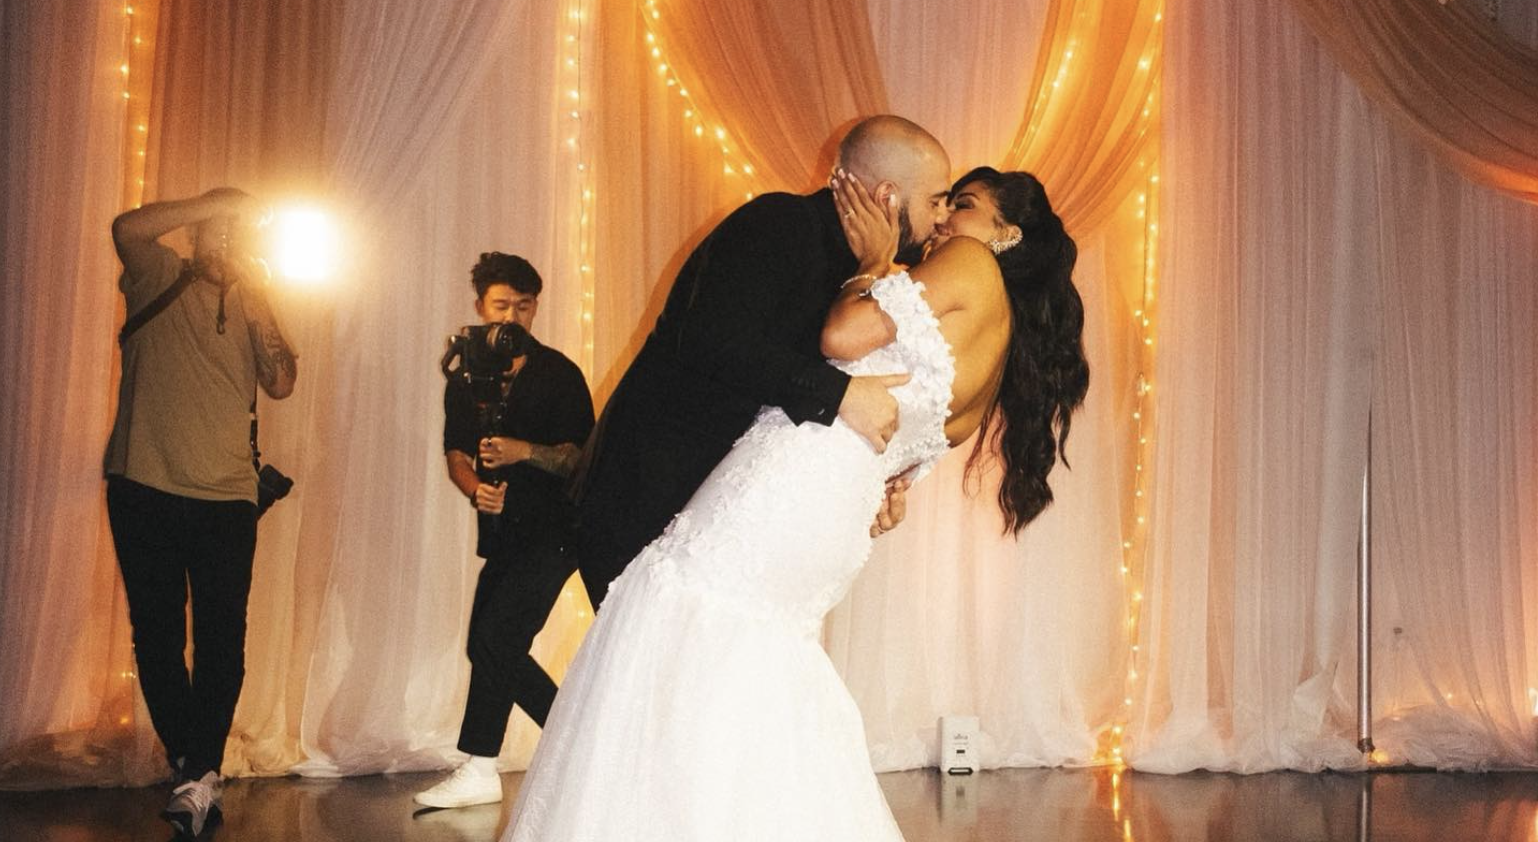 <div>Mazel Tov: Hot 97’s Peter Rosenberg & Natalie Amrossi Tie The Knot, Jim Jones Serenades The Newlyweds & Guests With “We Fly High”</div>